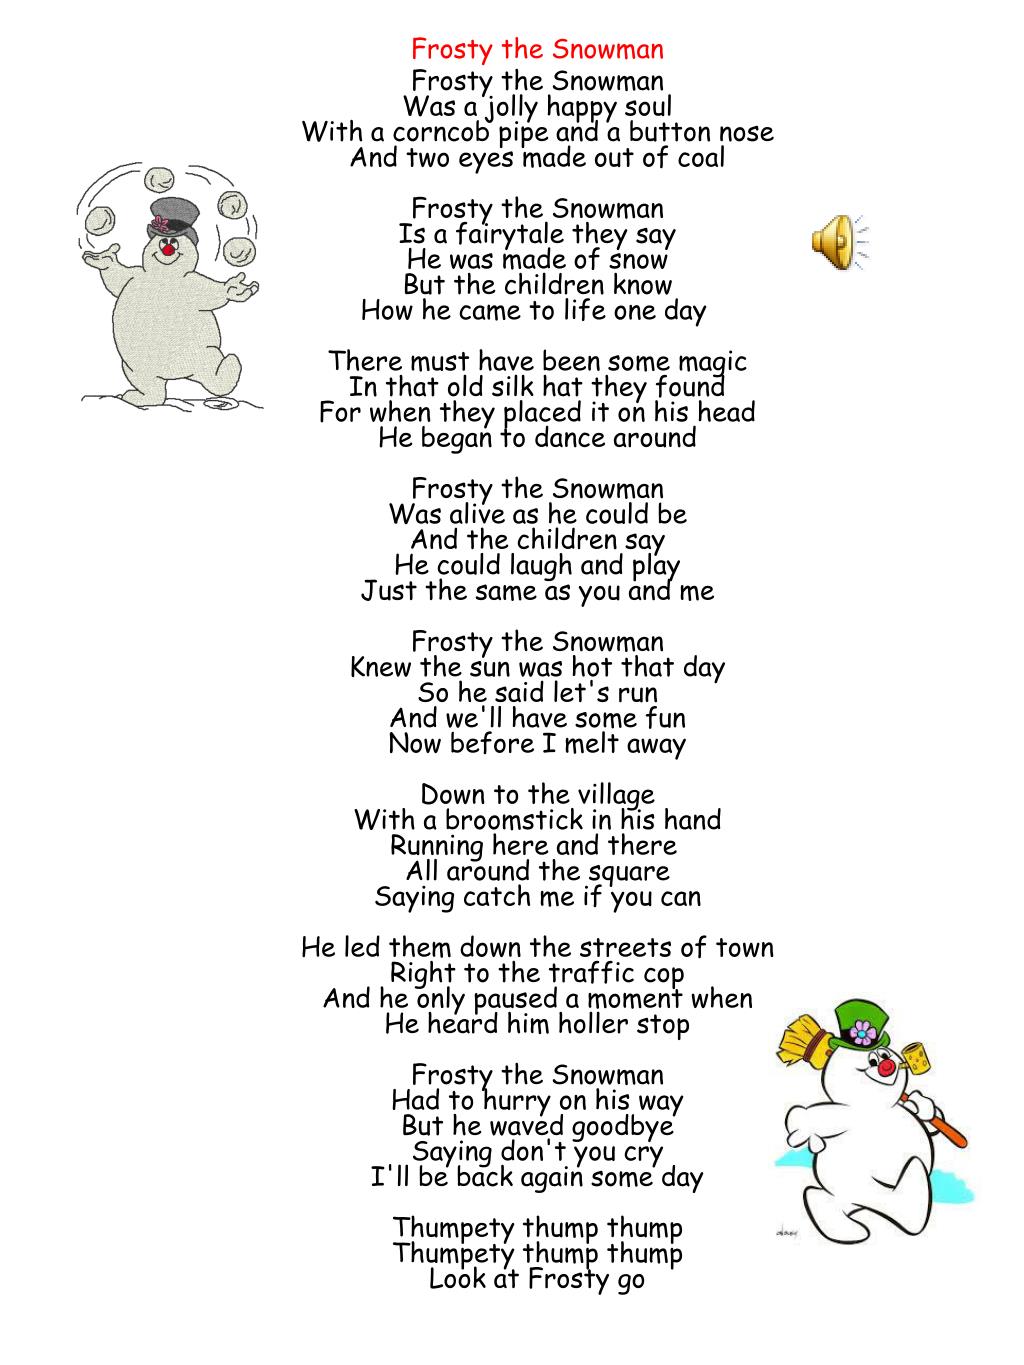 PPT Frosty the Snowman PowerPoint Presentation, free download ID